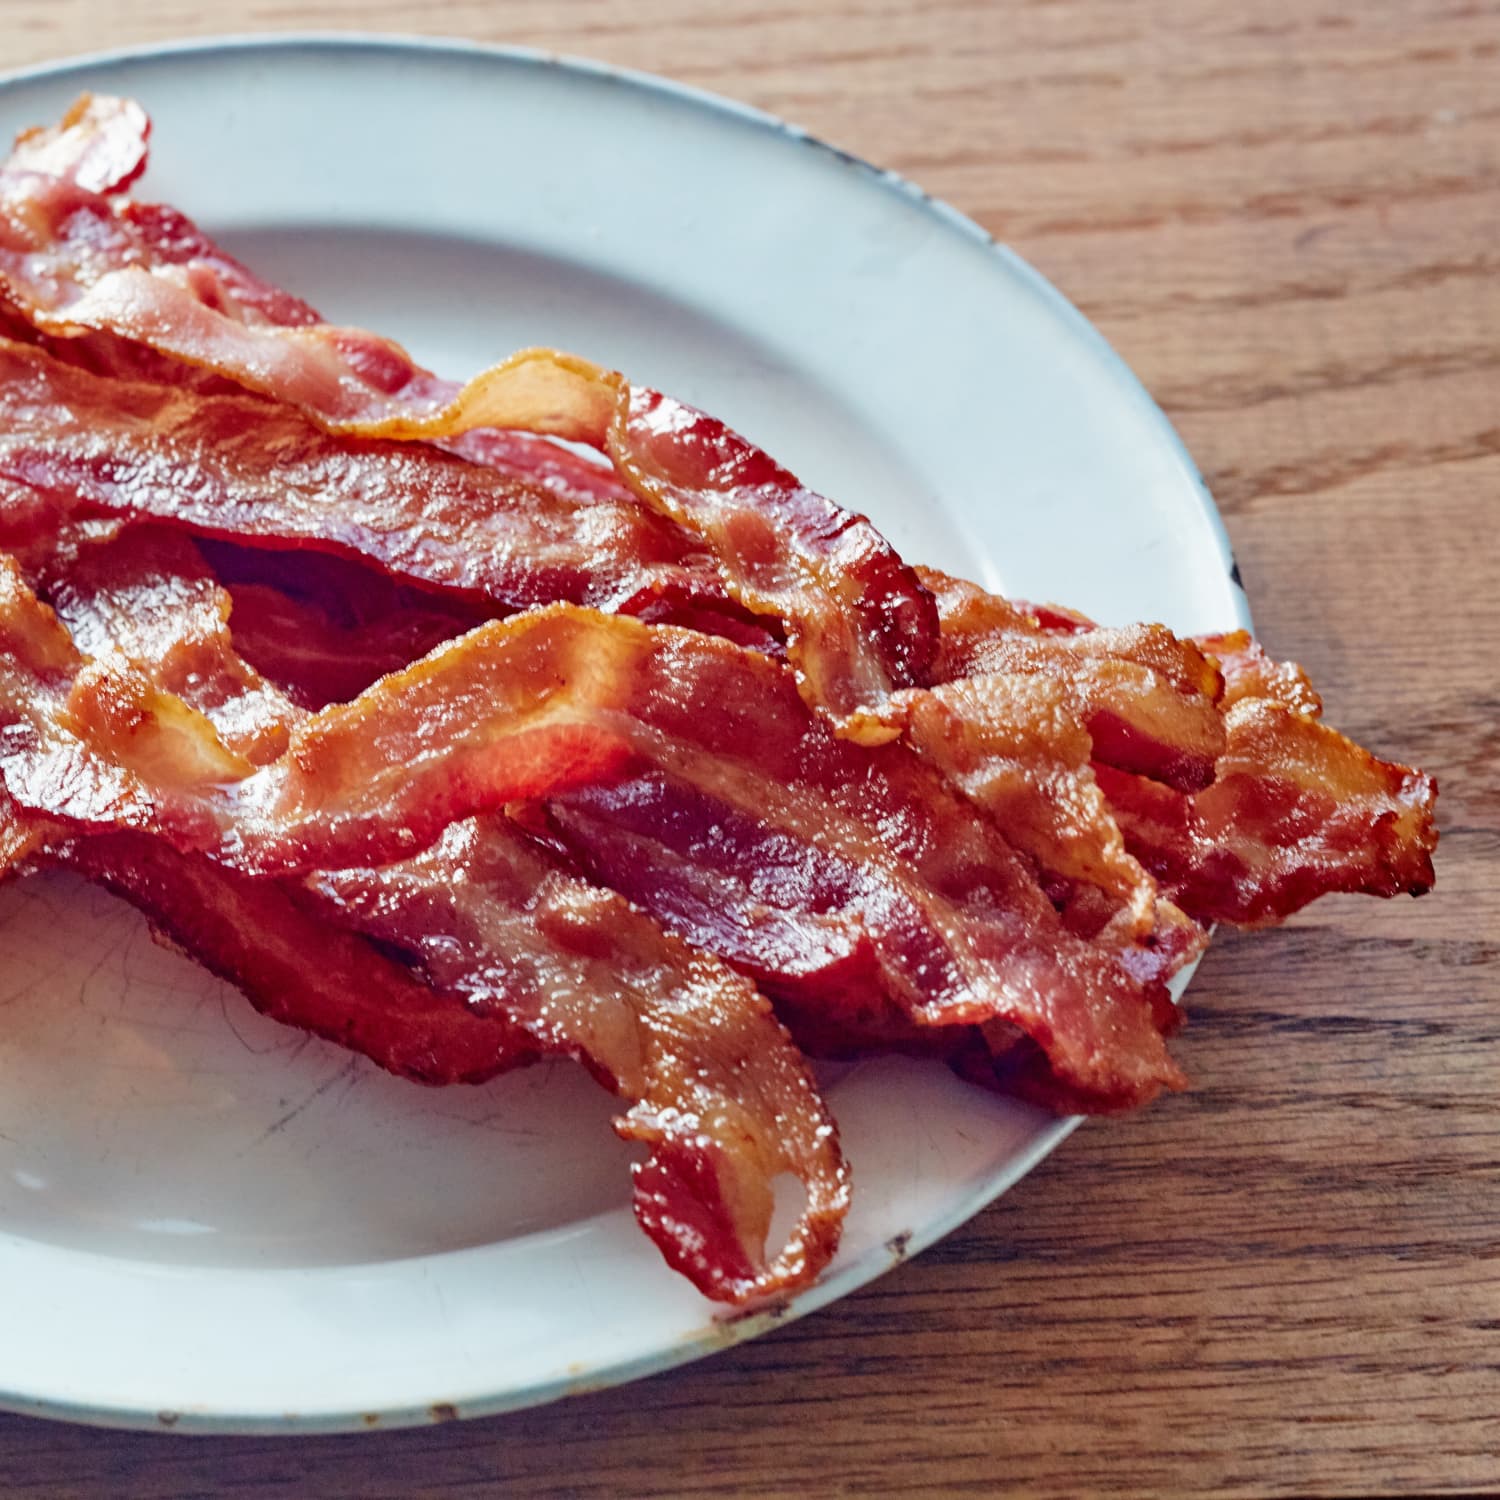 I Cooked Bacon in OVEN vs. AIR FRYER Bacon, it changed me FOREVER!